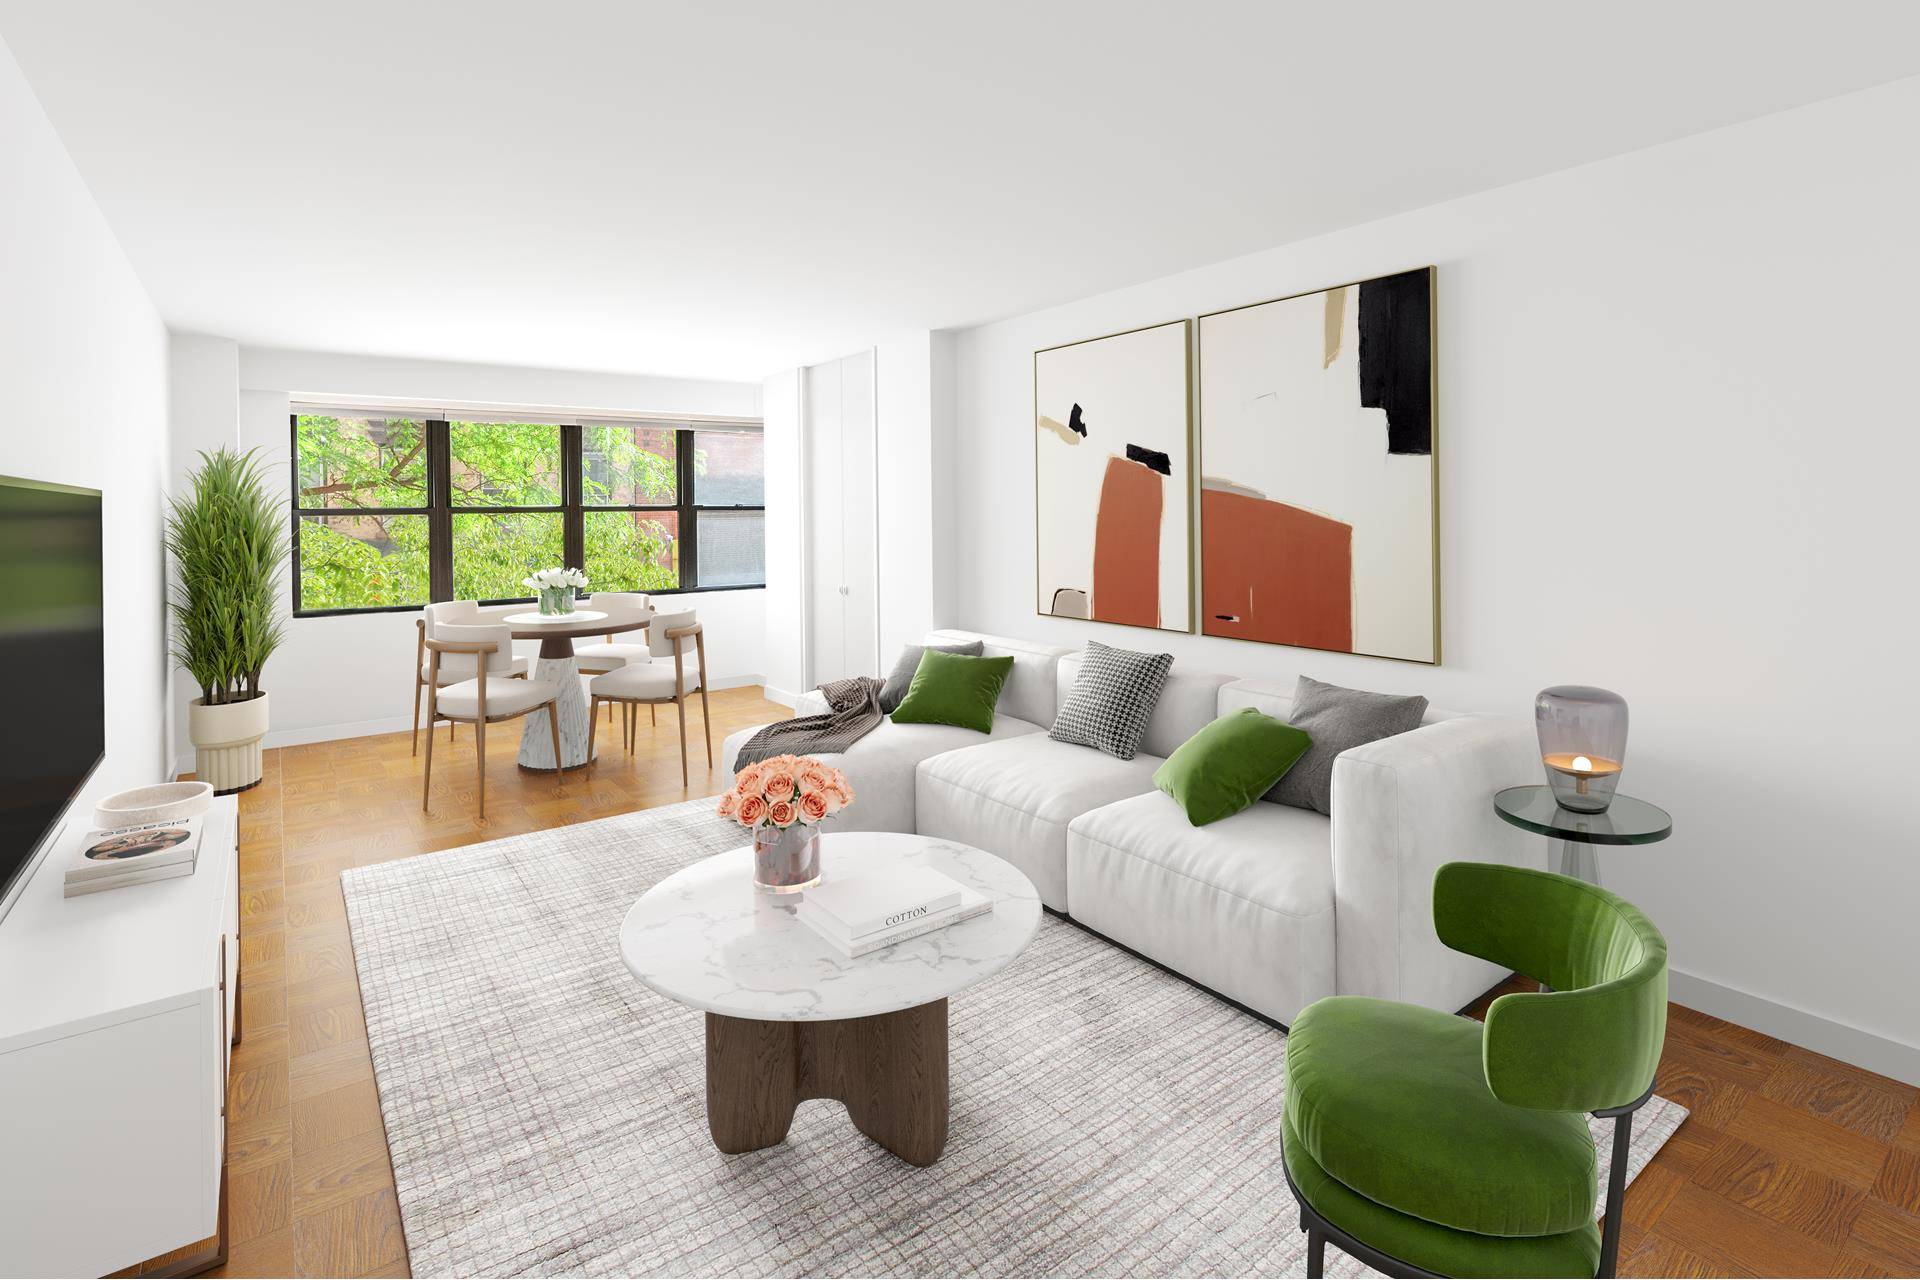 Welcome to Apartment 2J at 330 Third Ave in the heart of New York City.